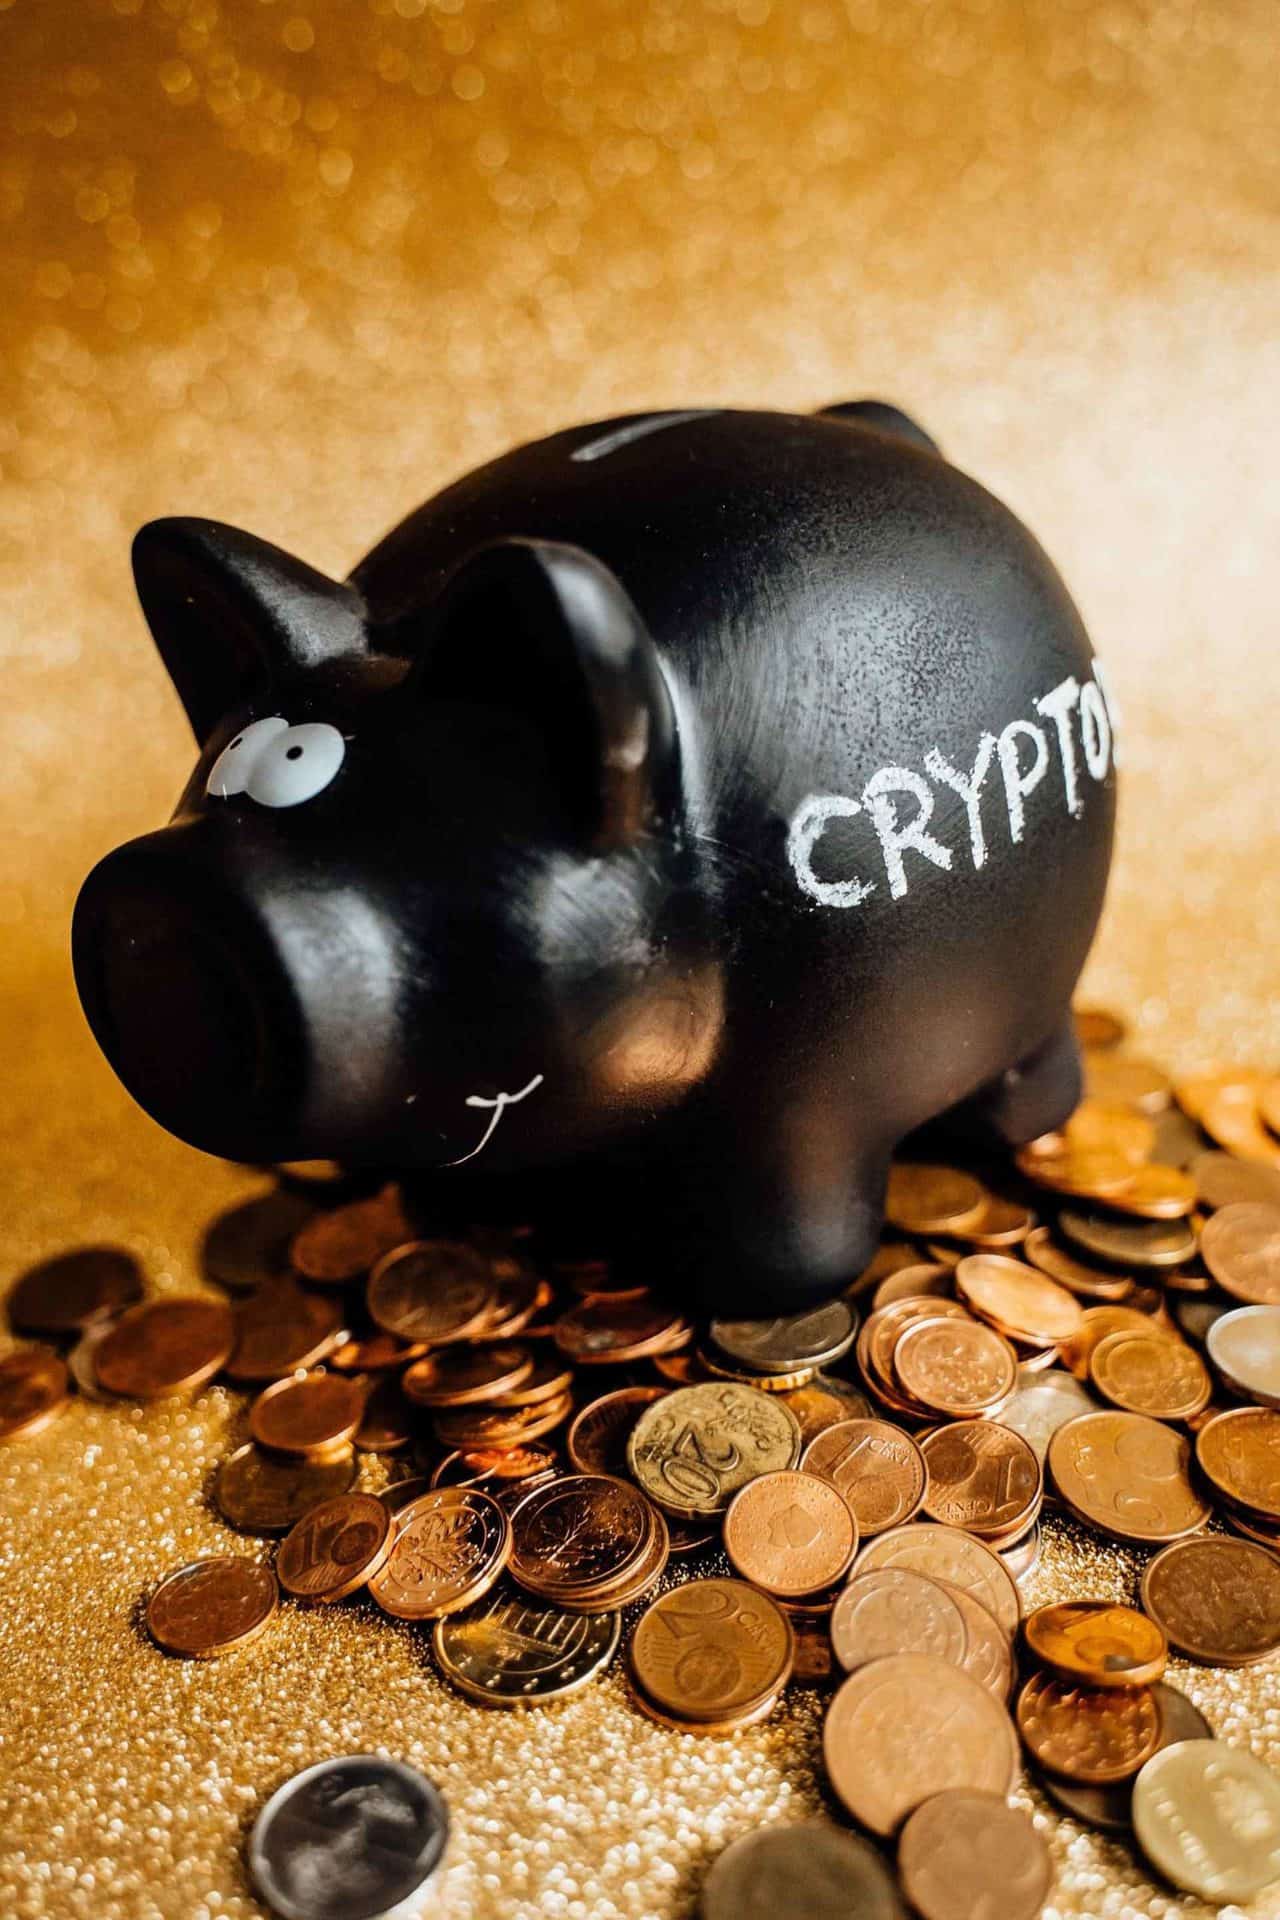 A black cryptocurrency piggy bank, how safe is it?